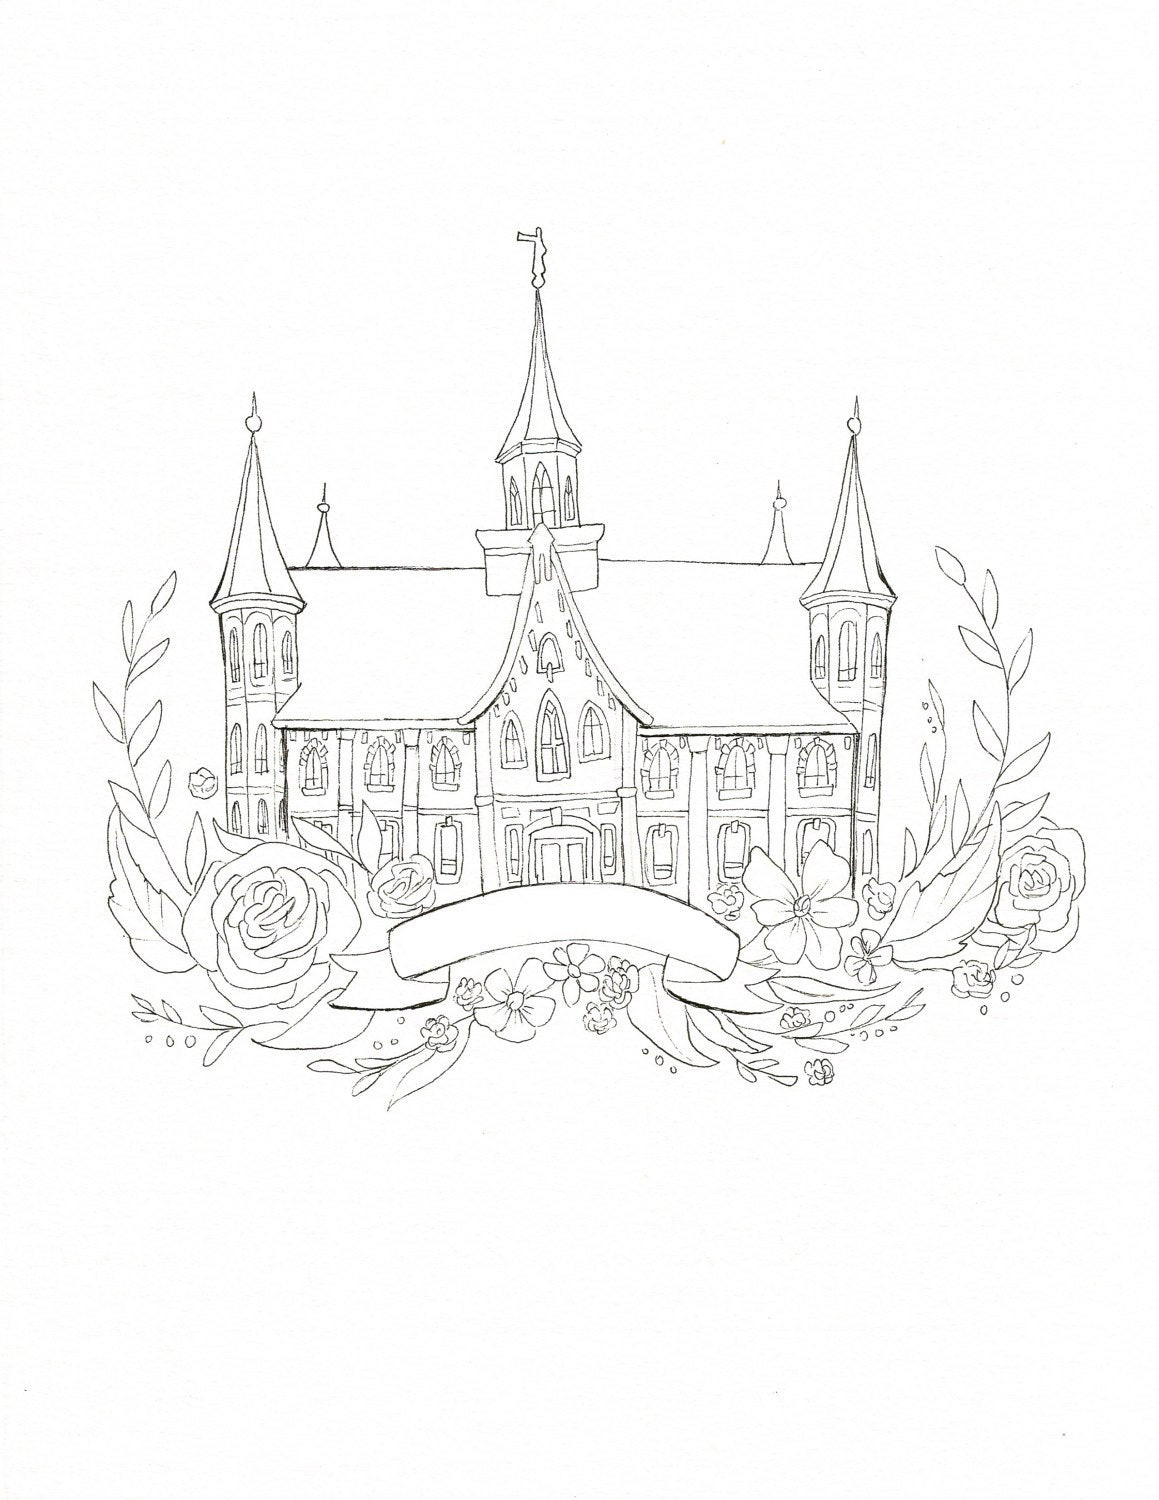 Lds Coloring Pages For Adults
 Provo City Center Temple Coloring page DIY painting Adult